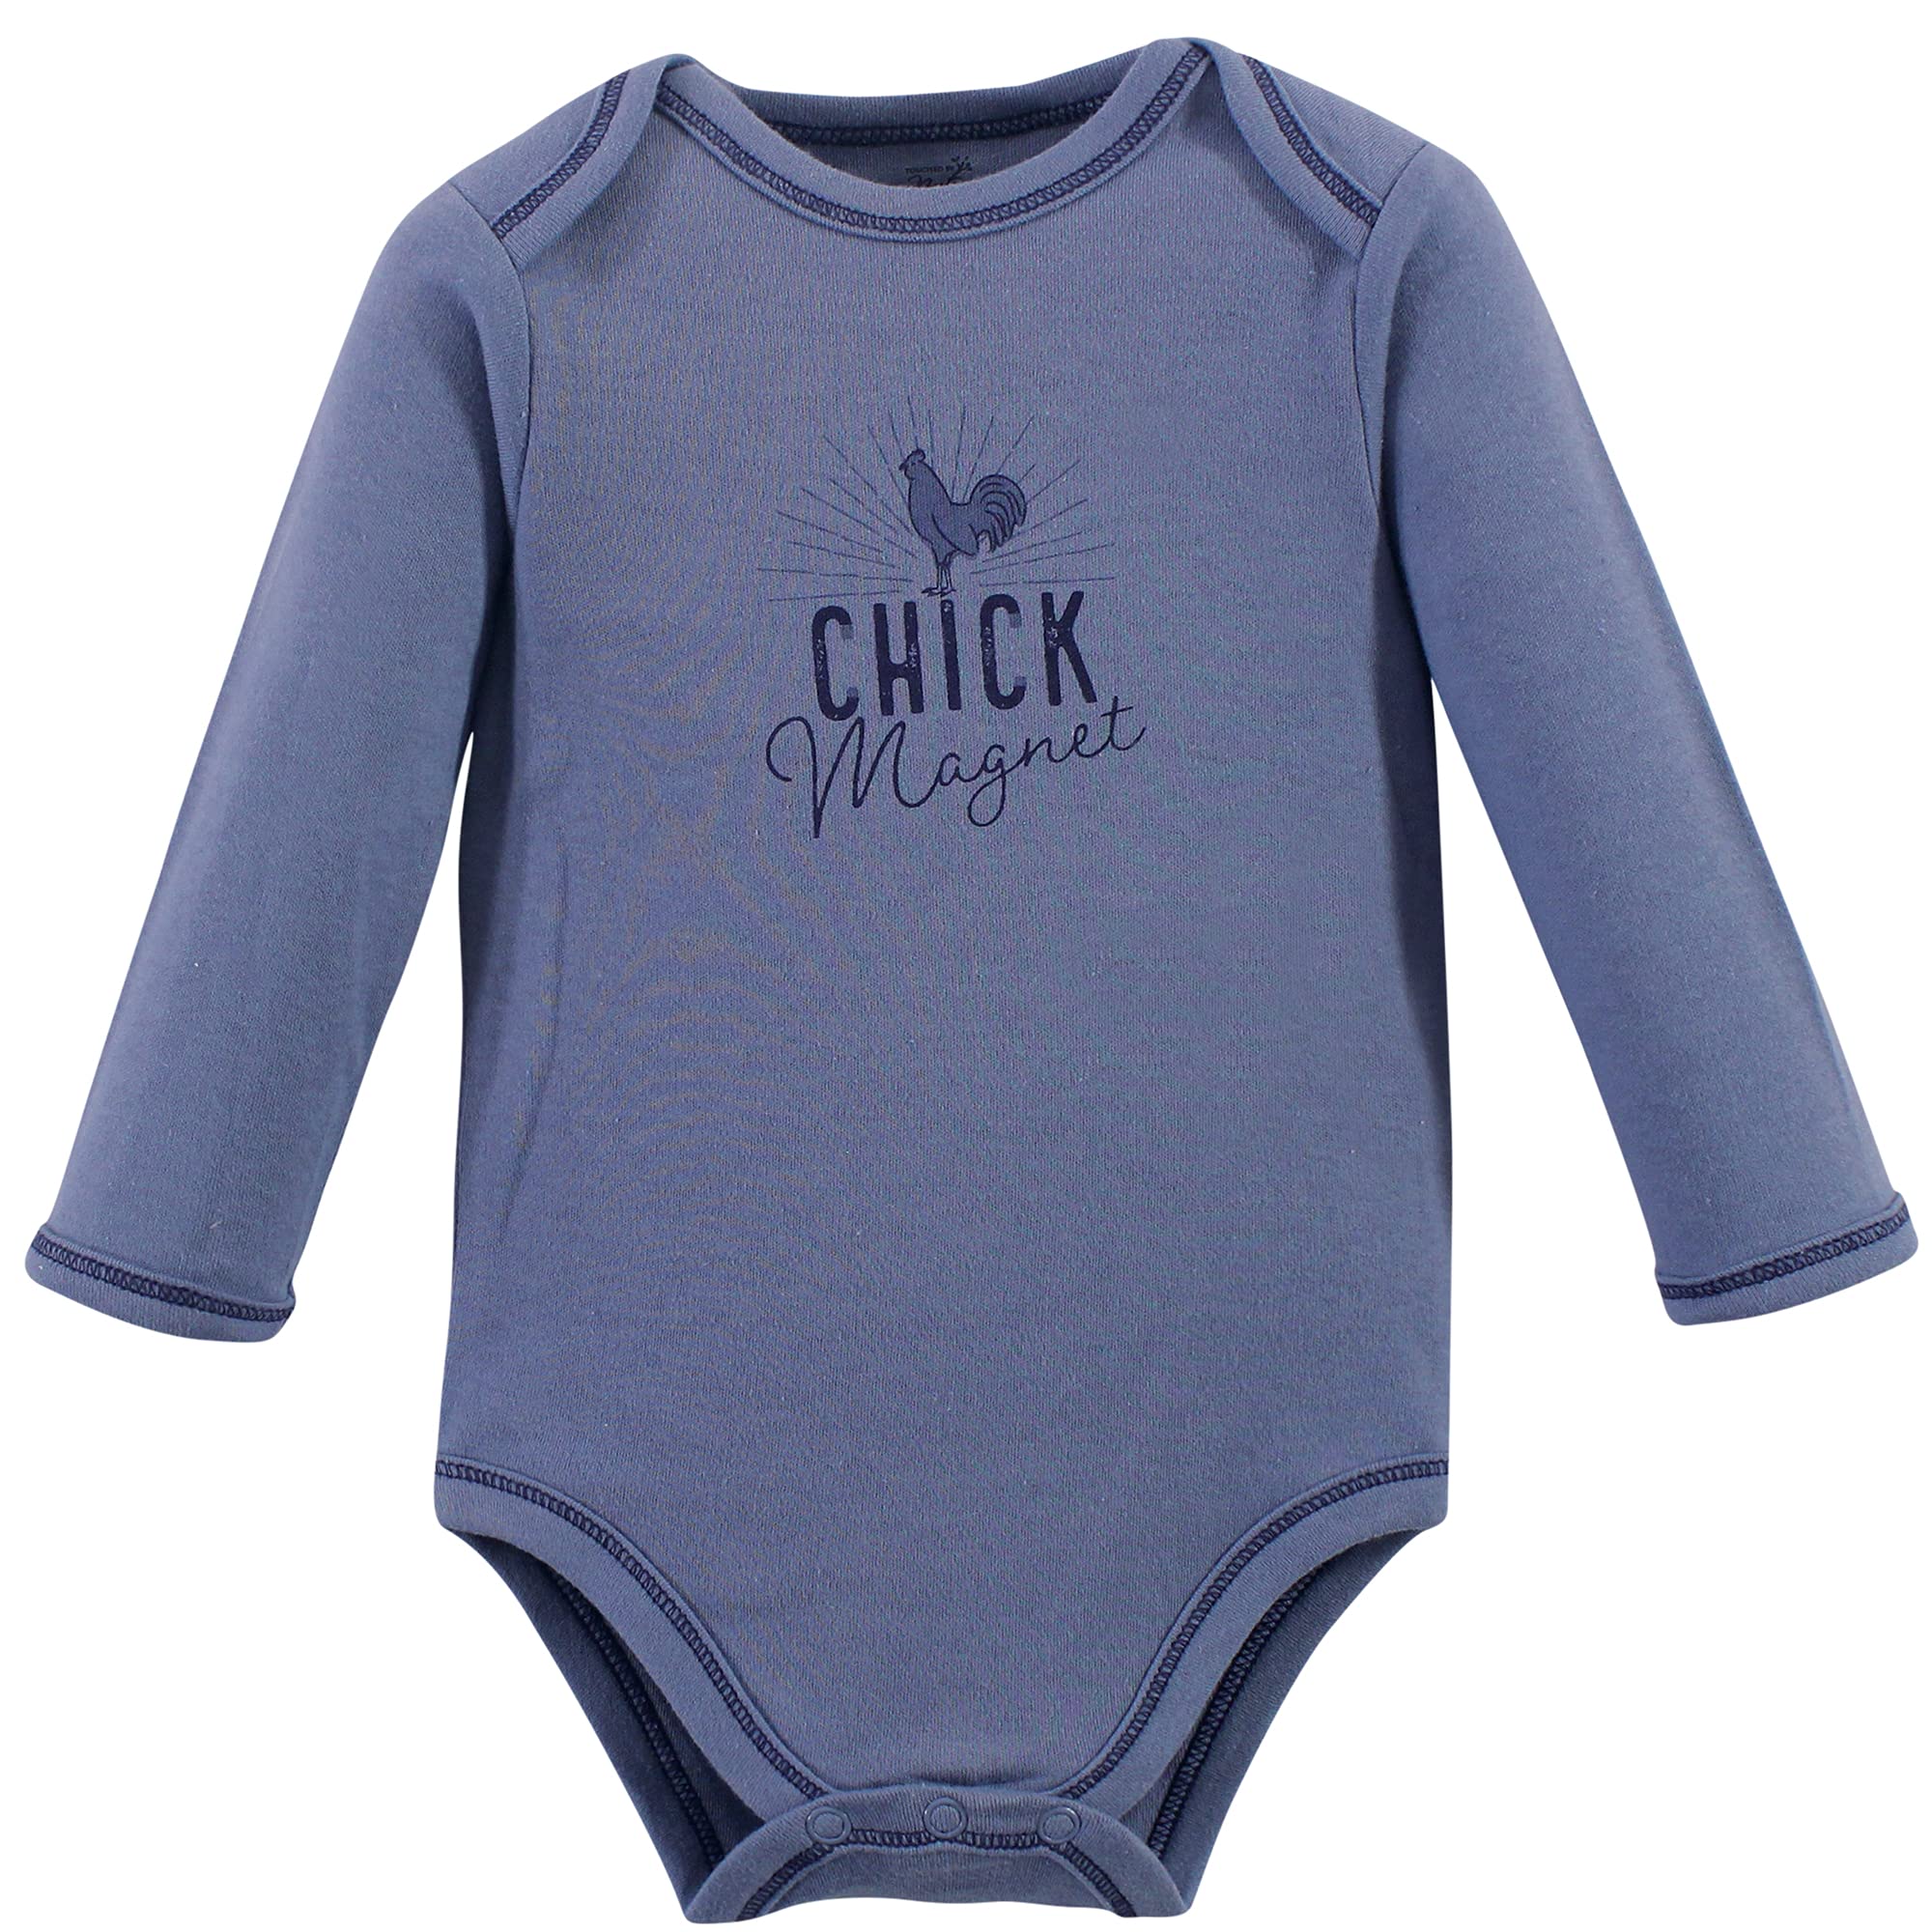 Touched by Nature Unisex Baby Organic Cotton Long-Sleeve Bodysuits